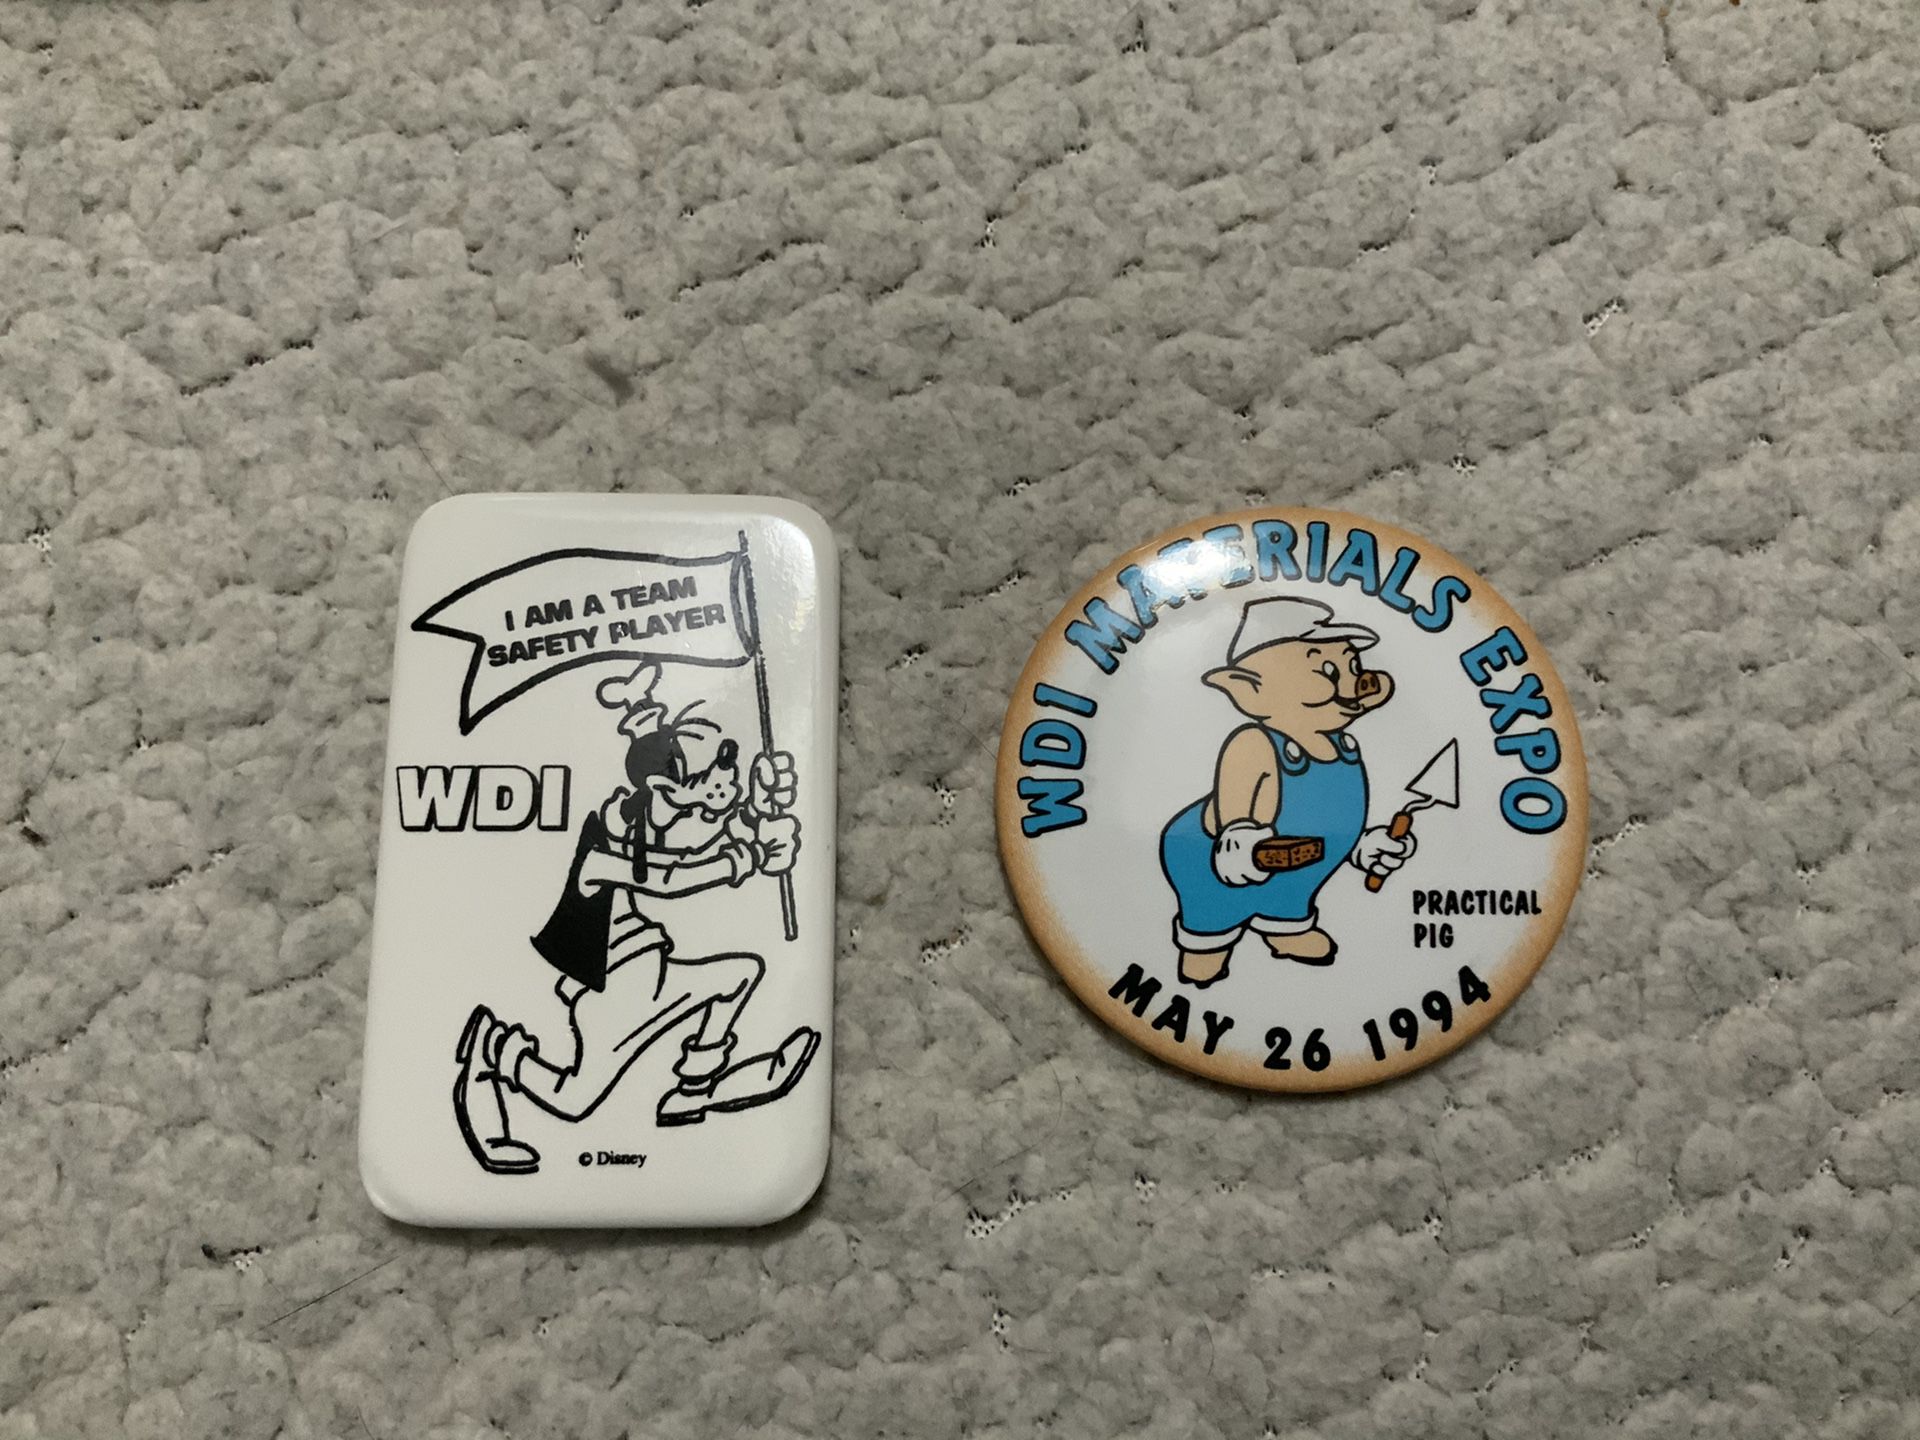 2- NEW Walt Disney WDI Materials Expo Practical Pig May 26, 1994 Button AND WDI I Am A Team Safety Player Goofy Button